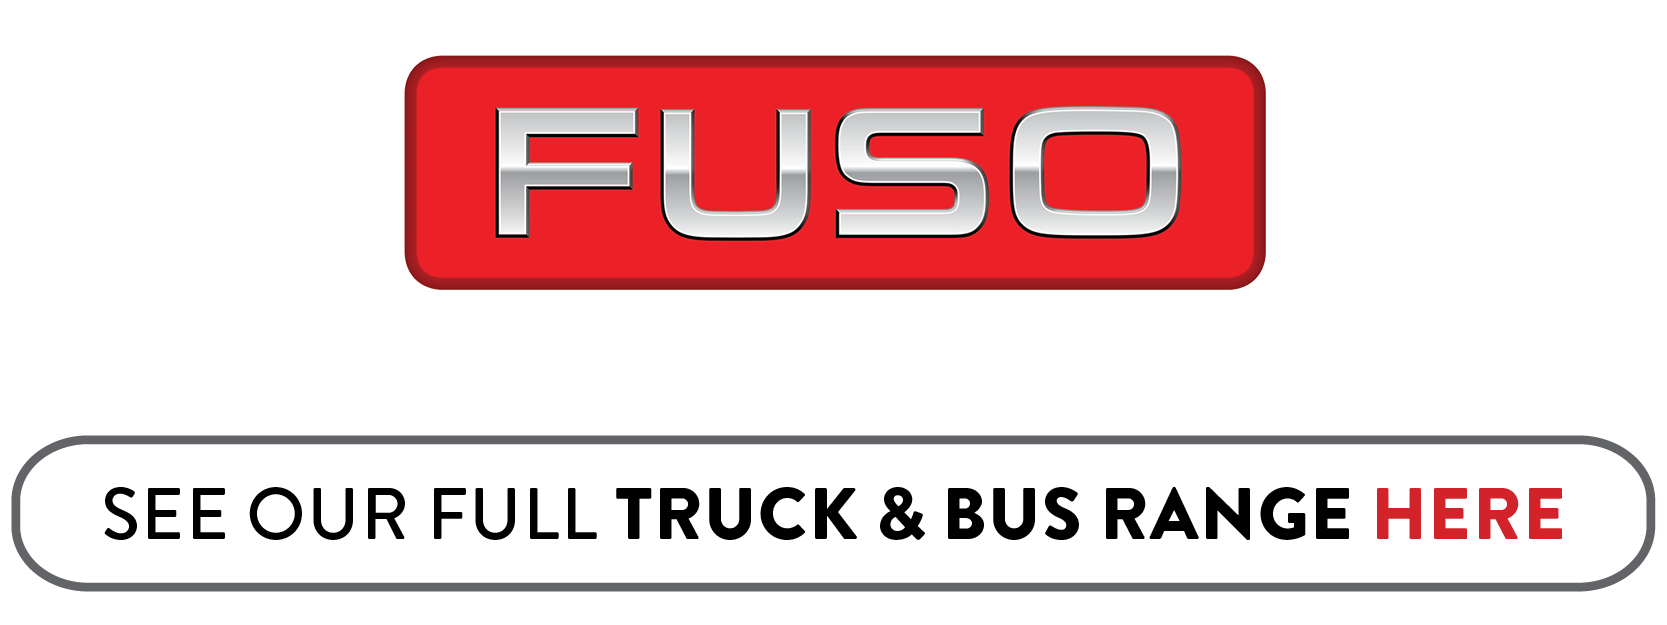 FUSO trucks and buses